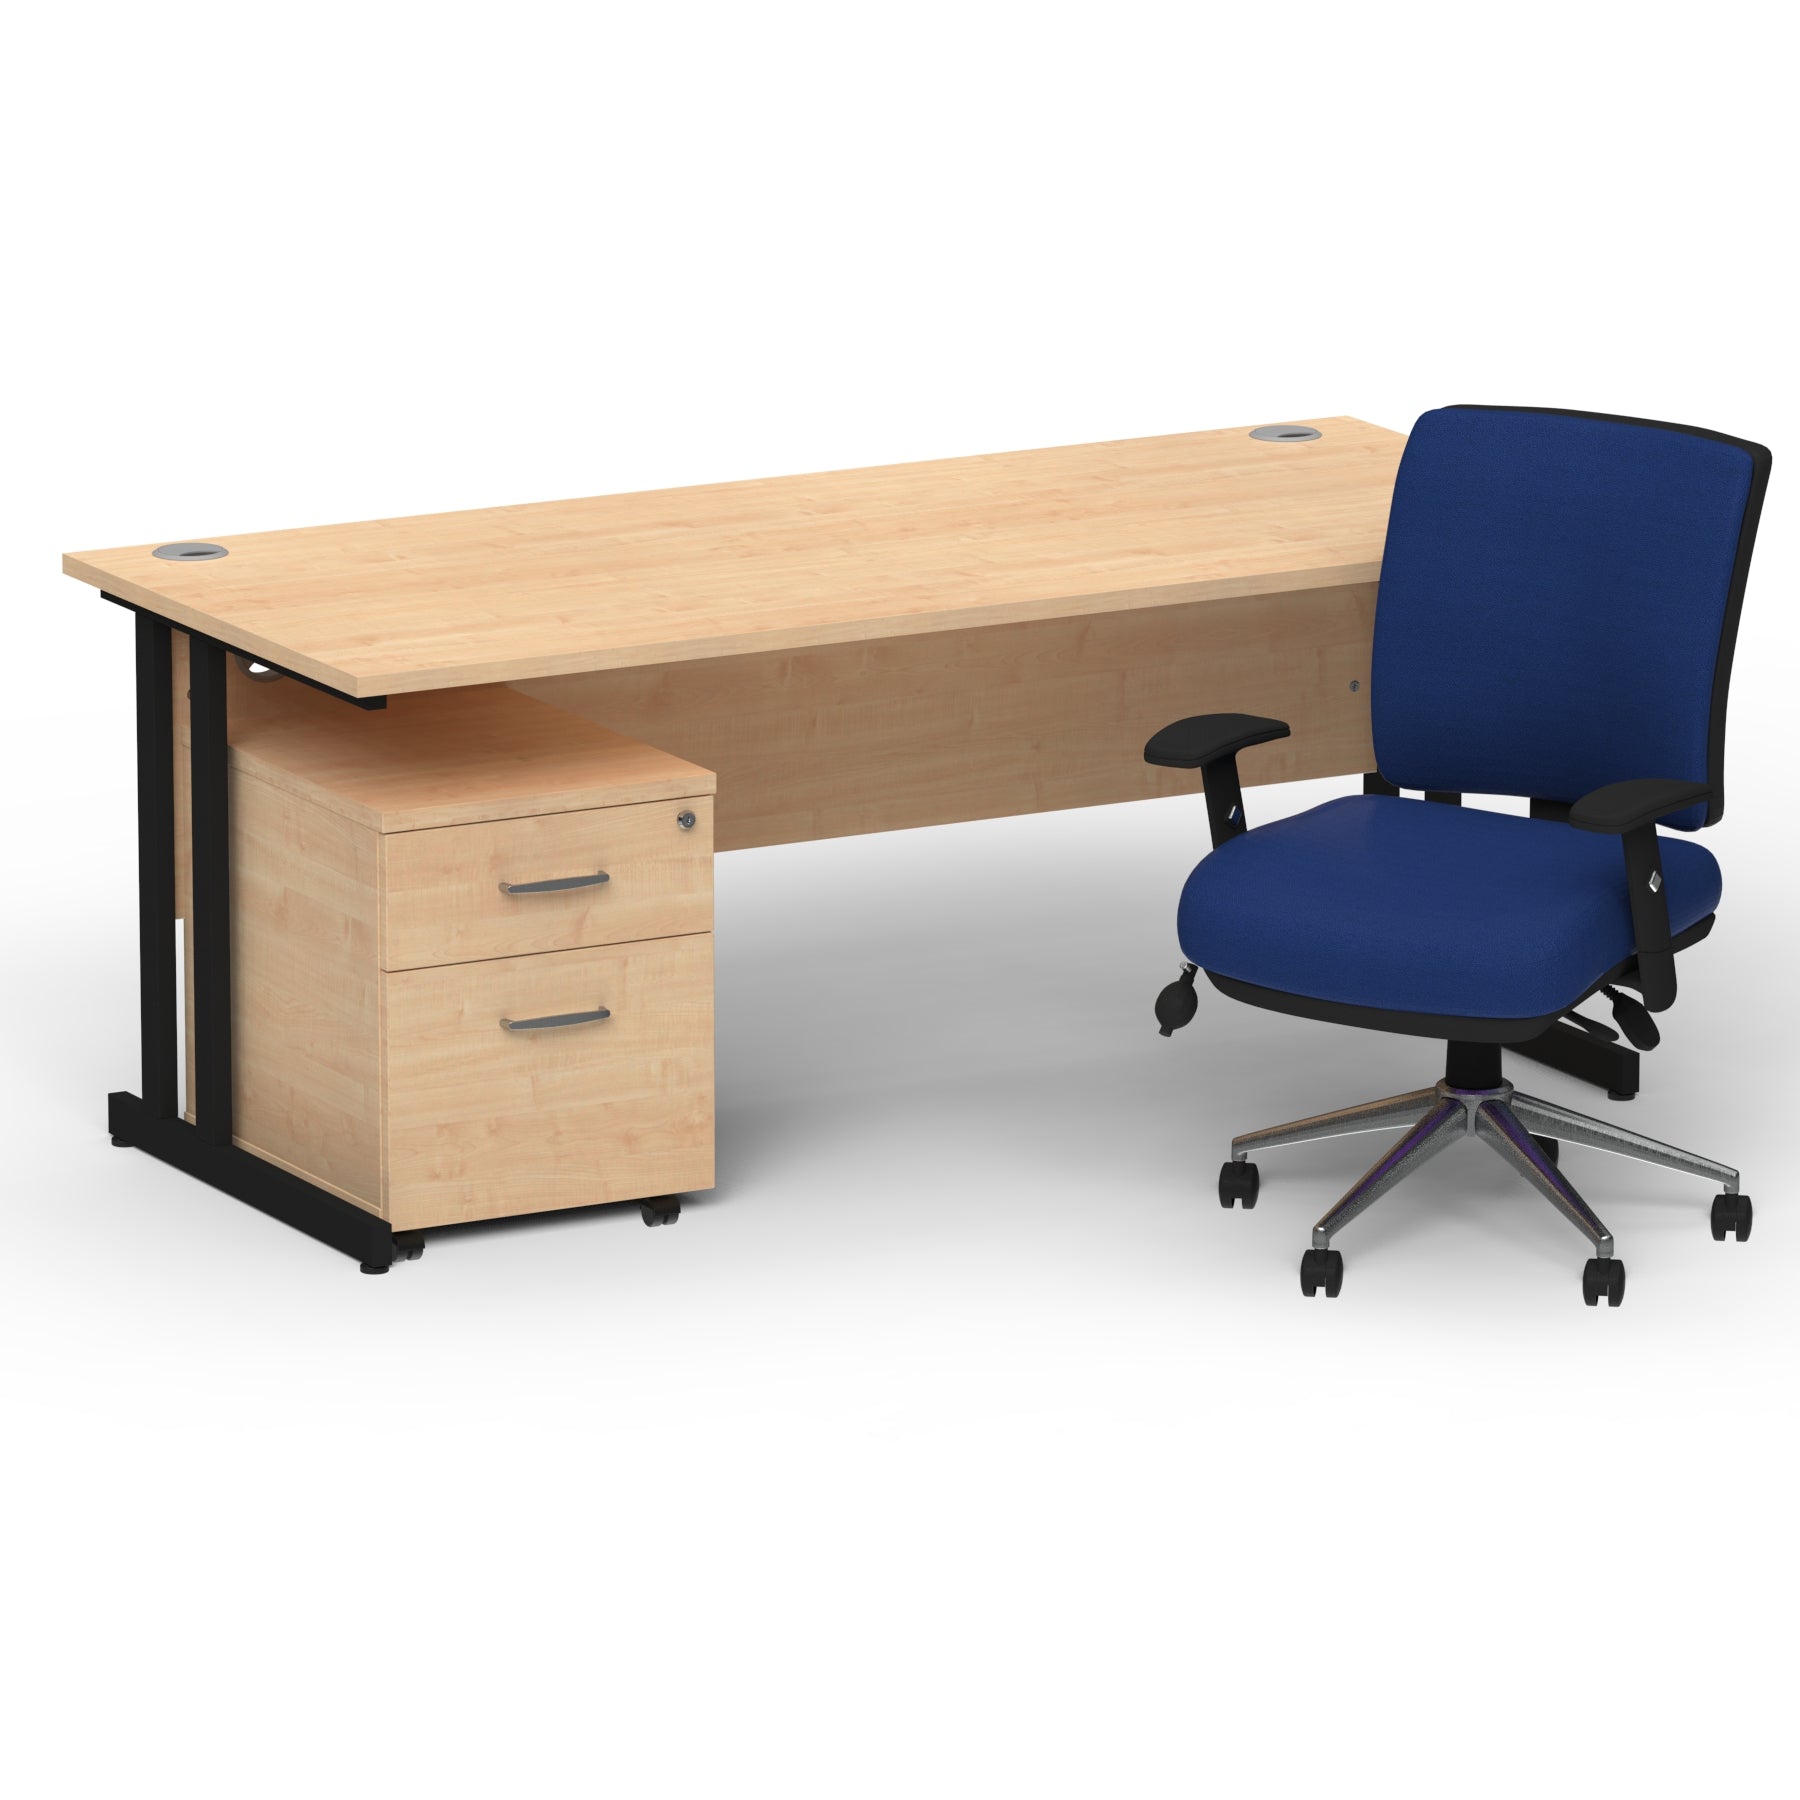 Impulse 1600mm Cantilever Straight Desk With Mobile Pedestal and Chiro Medium Back Blue Operator Chair